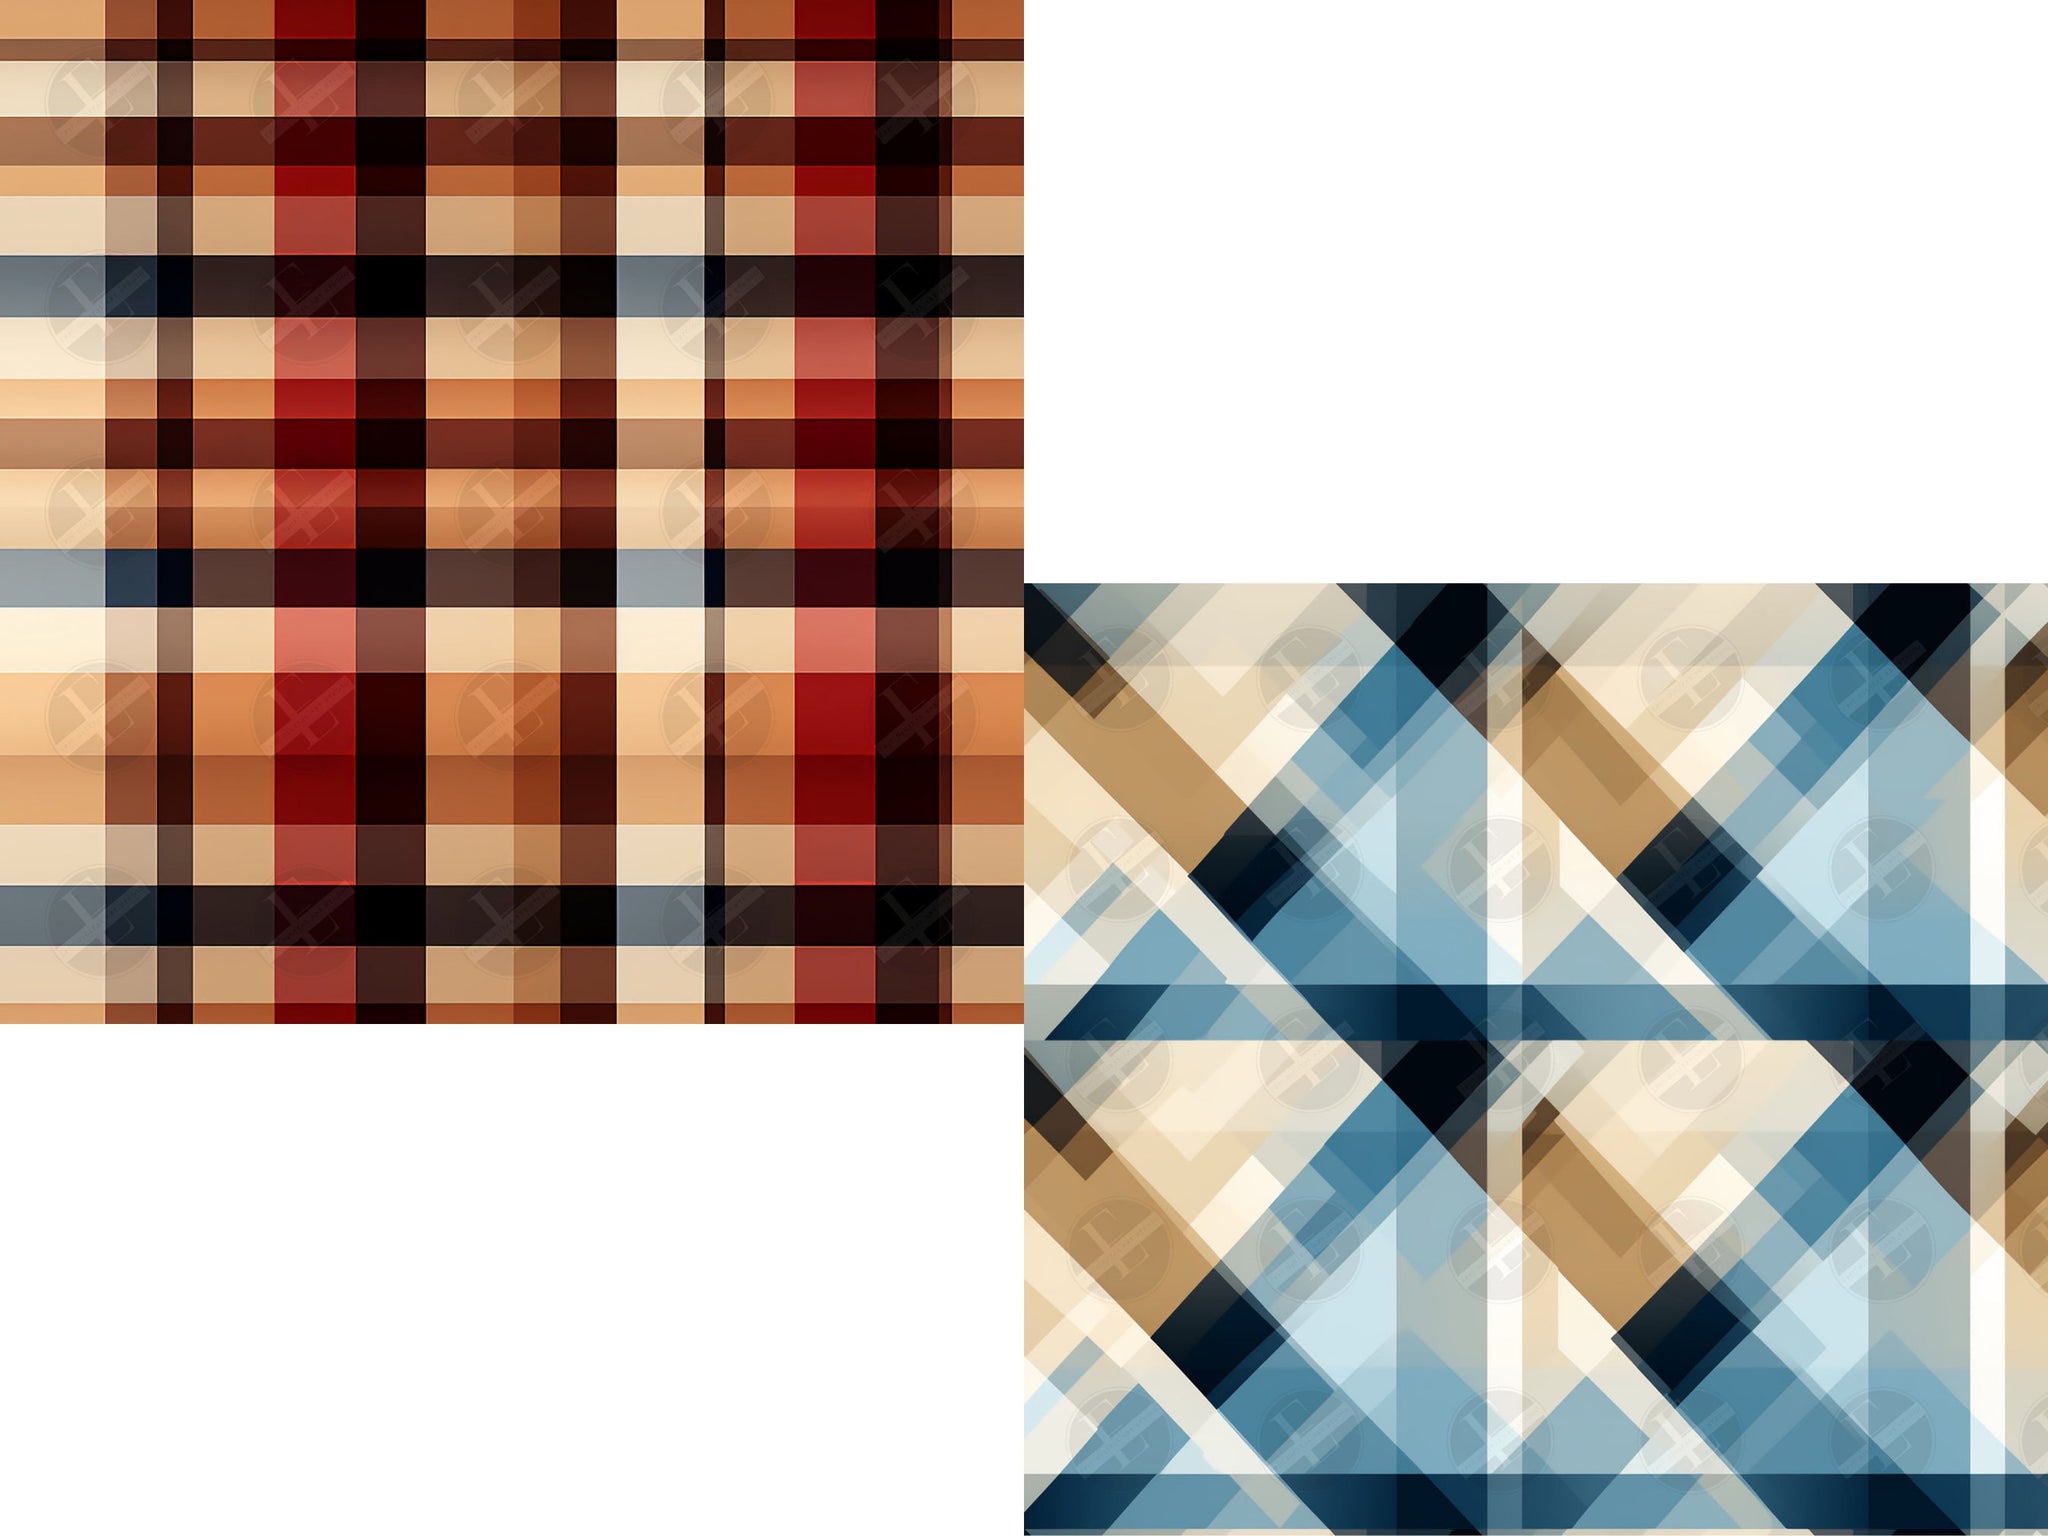 Autumn Plaid Seamless Patterns Digital Download PNG - Bundle of 10 - Rich Autumn Color Patterns - Commercial & Personal Use